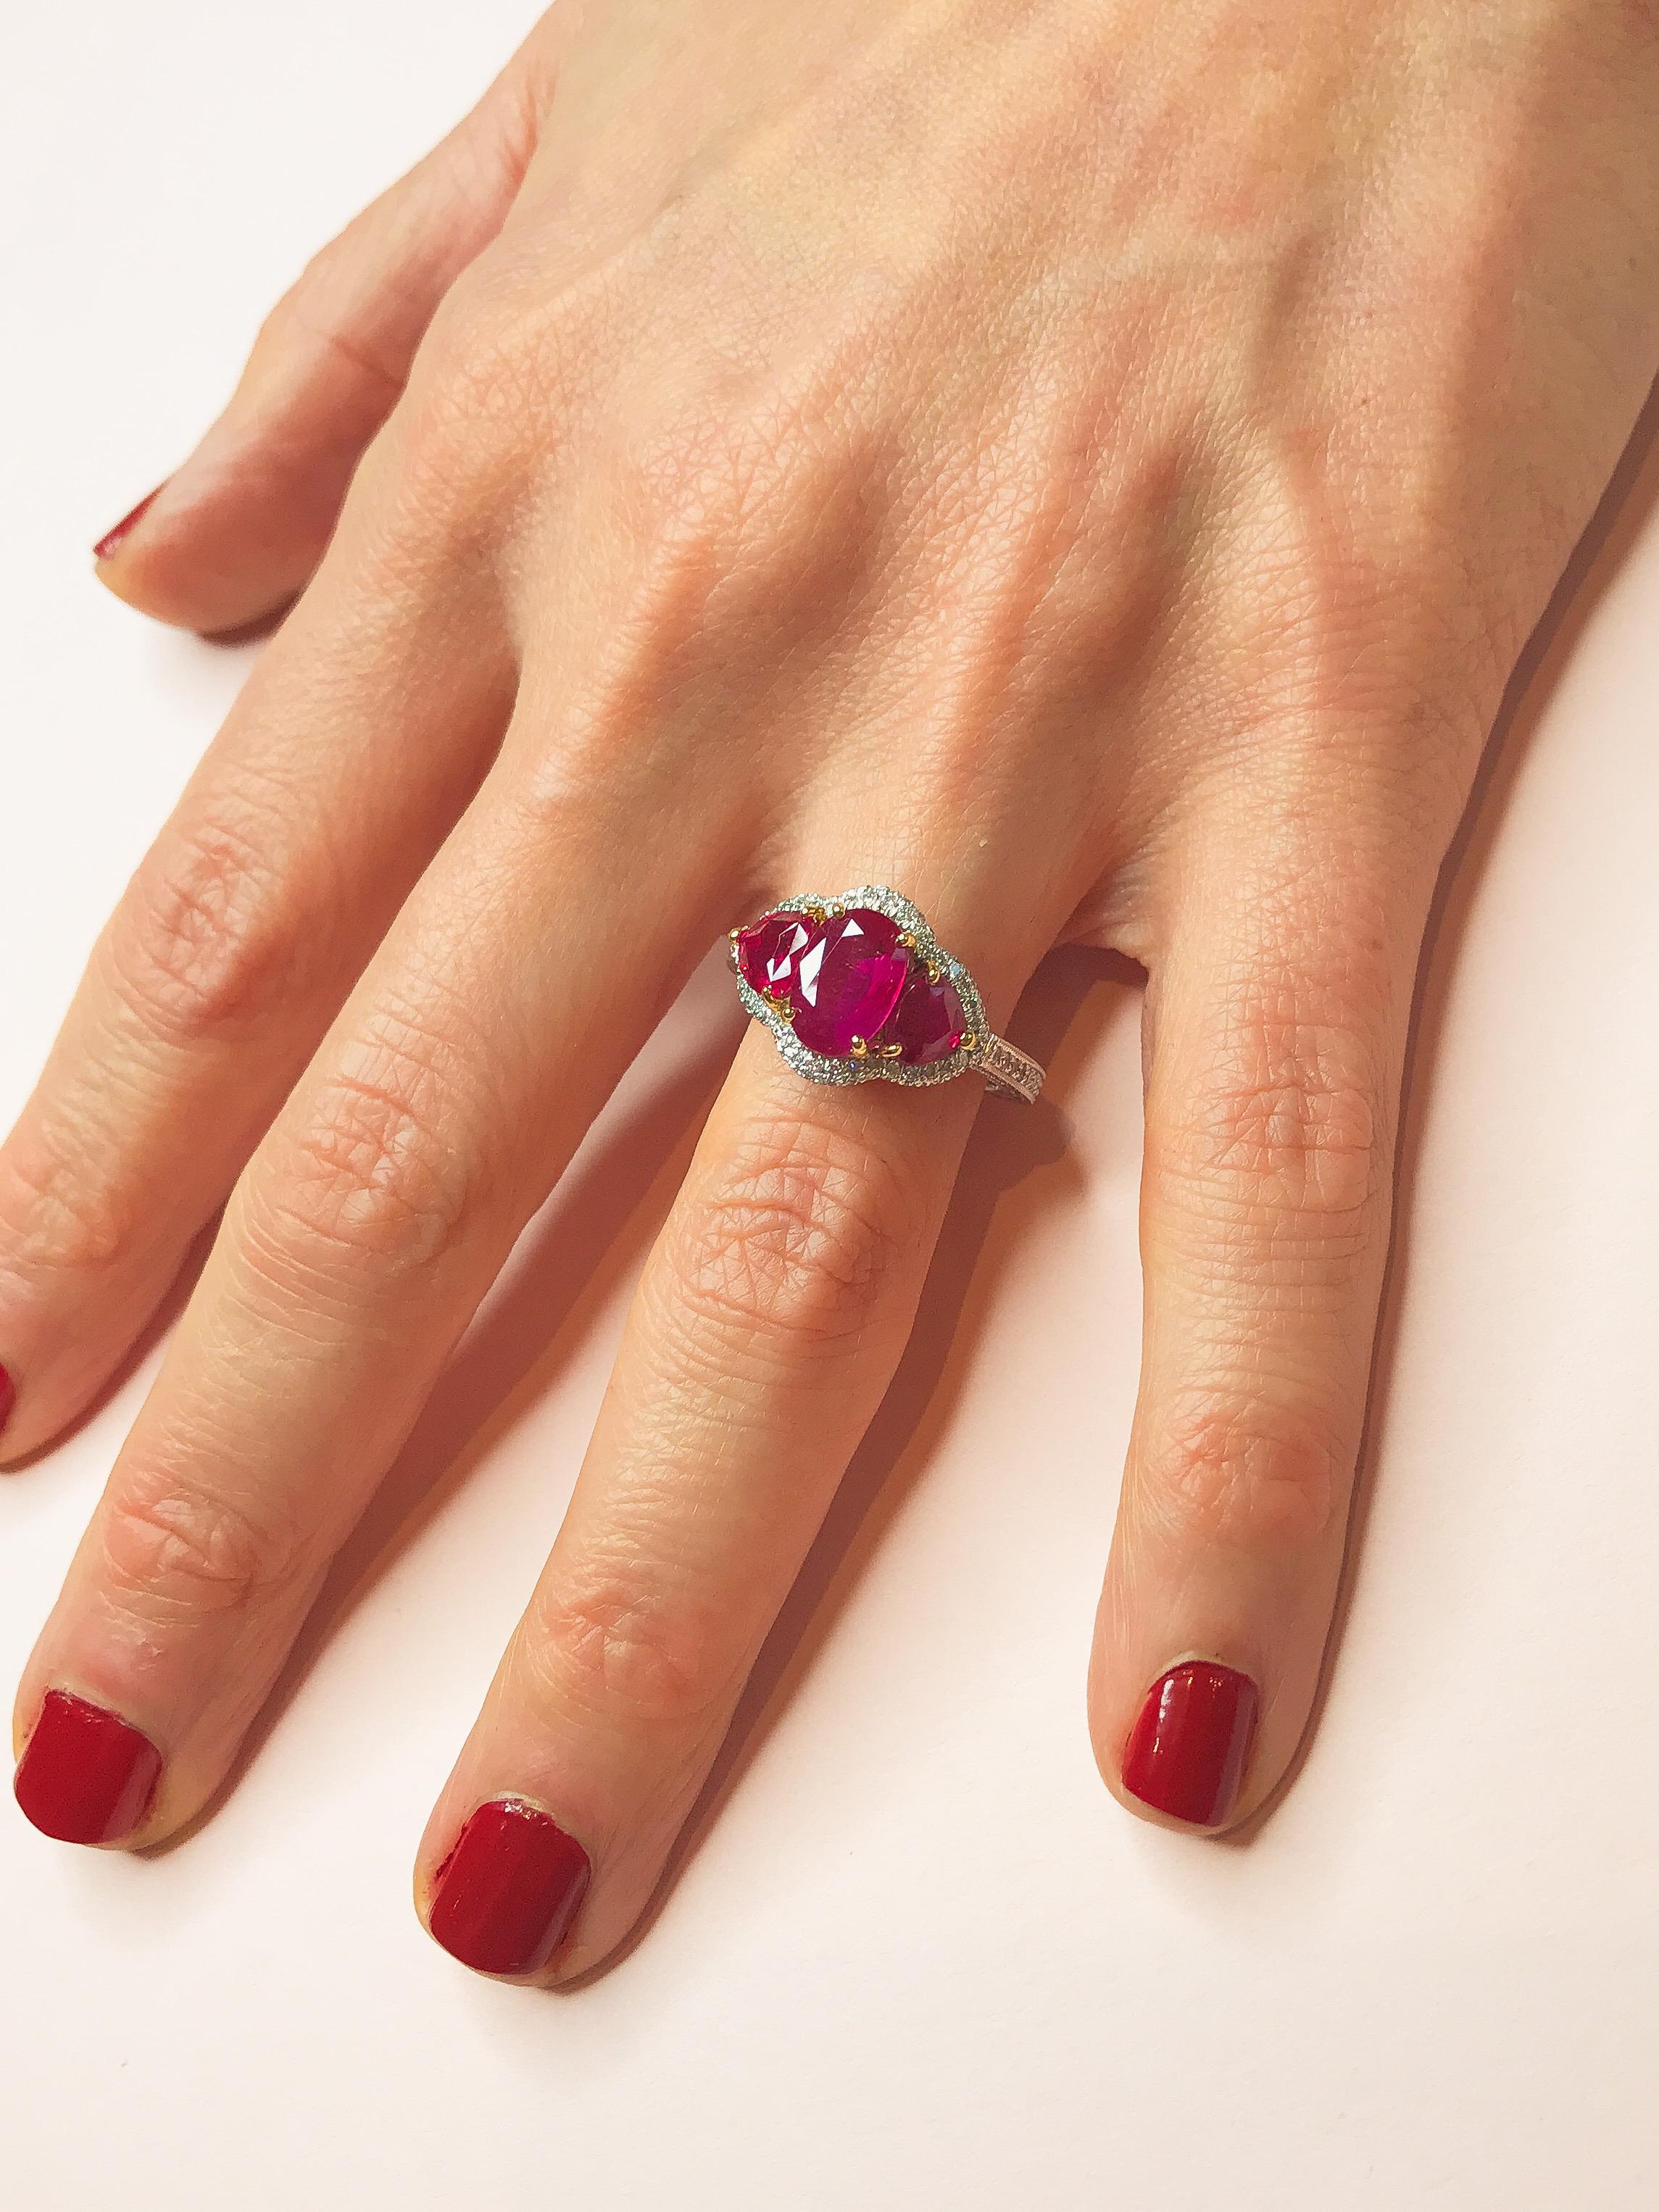 A three-stone ring like no other, this exquisite piece features an enticing pinkish red ruby in a timeless oval shape and two smaller, trilliant cut rubies in the same arresting colour. The stones are set in yellow gold and embraced by a dazzling